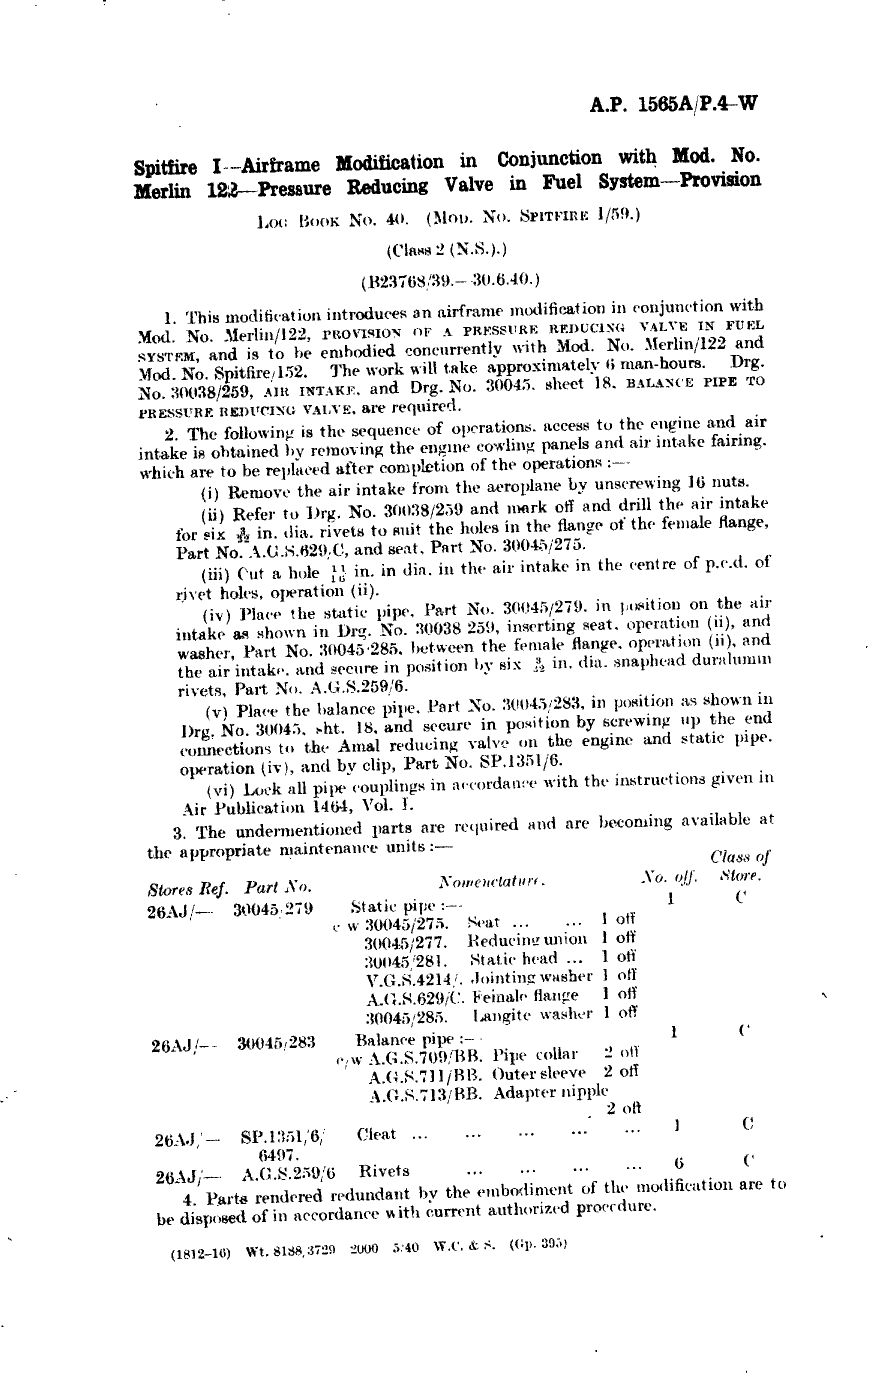 Sample page 1 from AirCorps Library document: Spitfire I Airframe Modification in Conjunction with Mod No. Merlin 122 Pressure Reducing Valve in Fuel System Provision